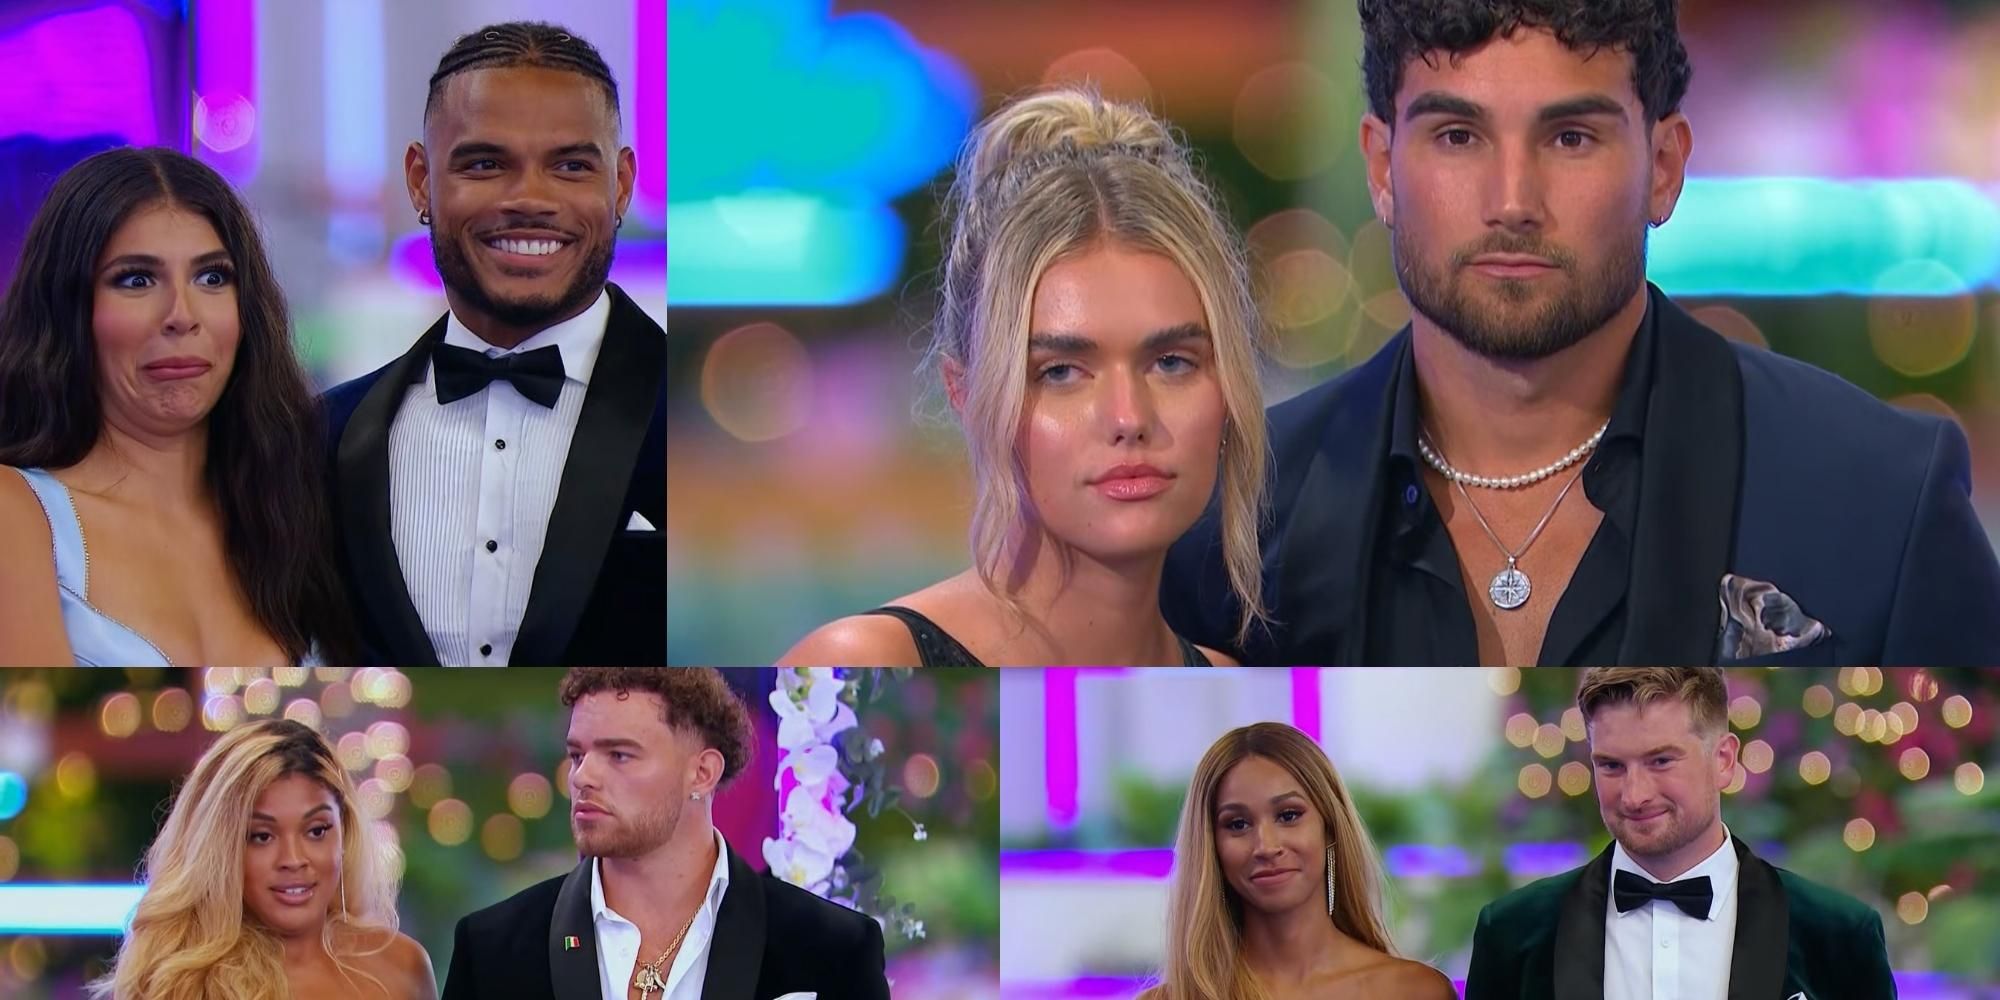 Are Bergie & Taylor From Love Island Season 5 Together After The Show?